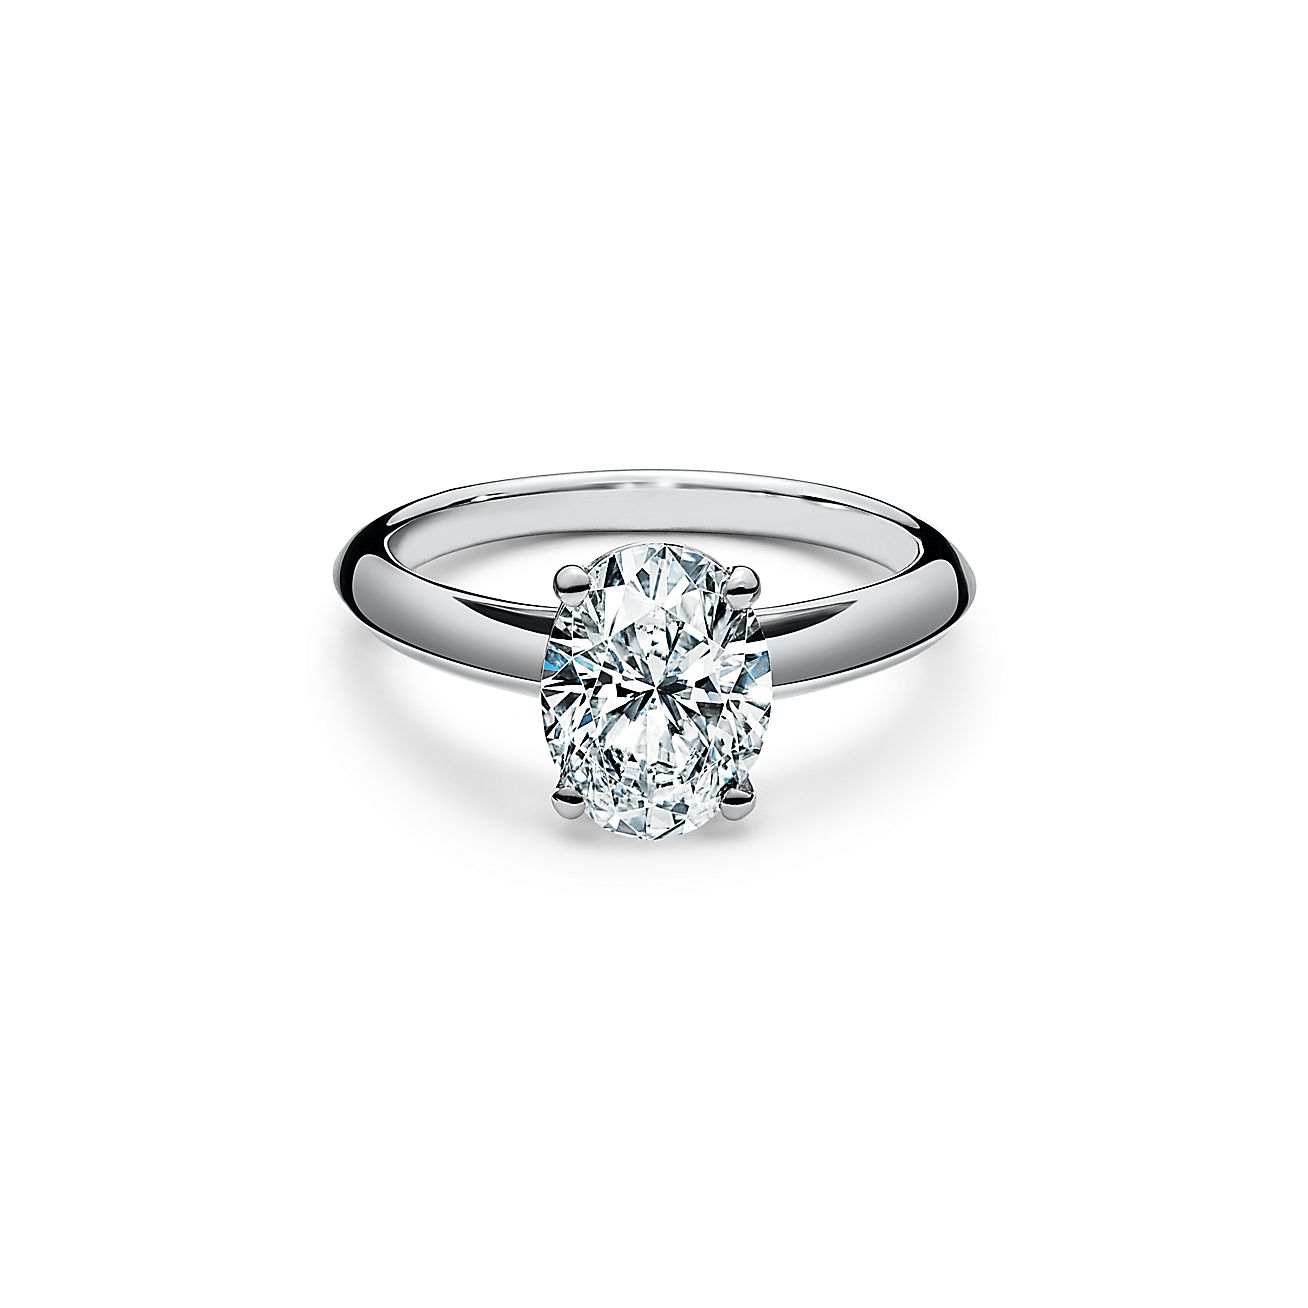 Oval-Cut Diamond Engagement Ring In Platinum. | Tiffany & Co.